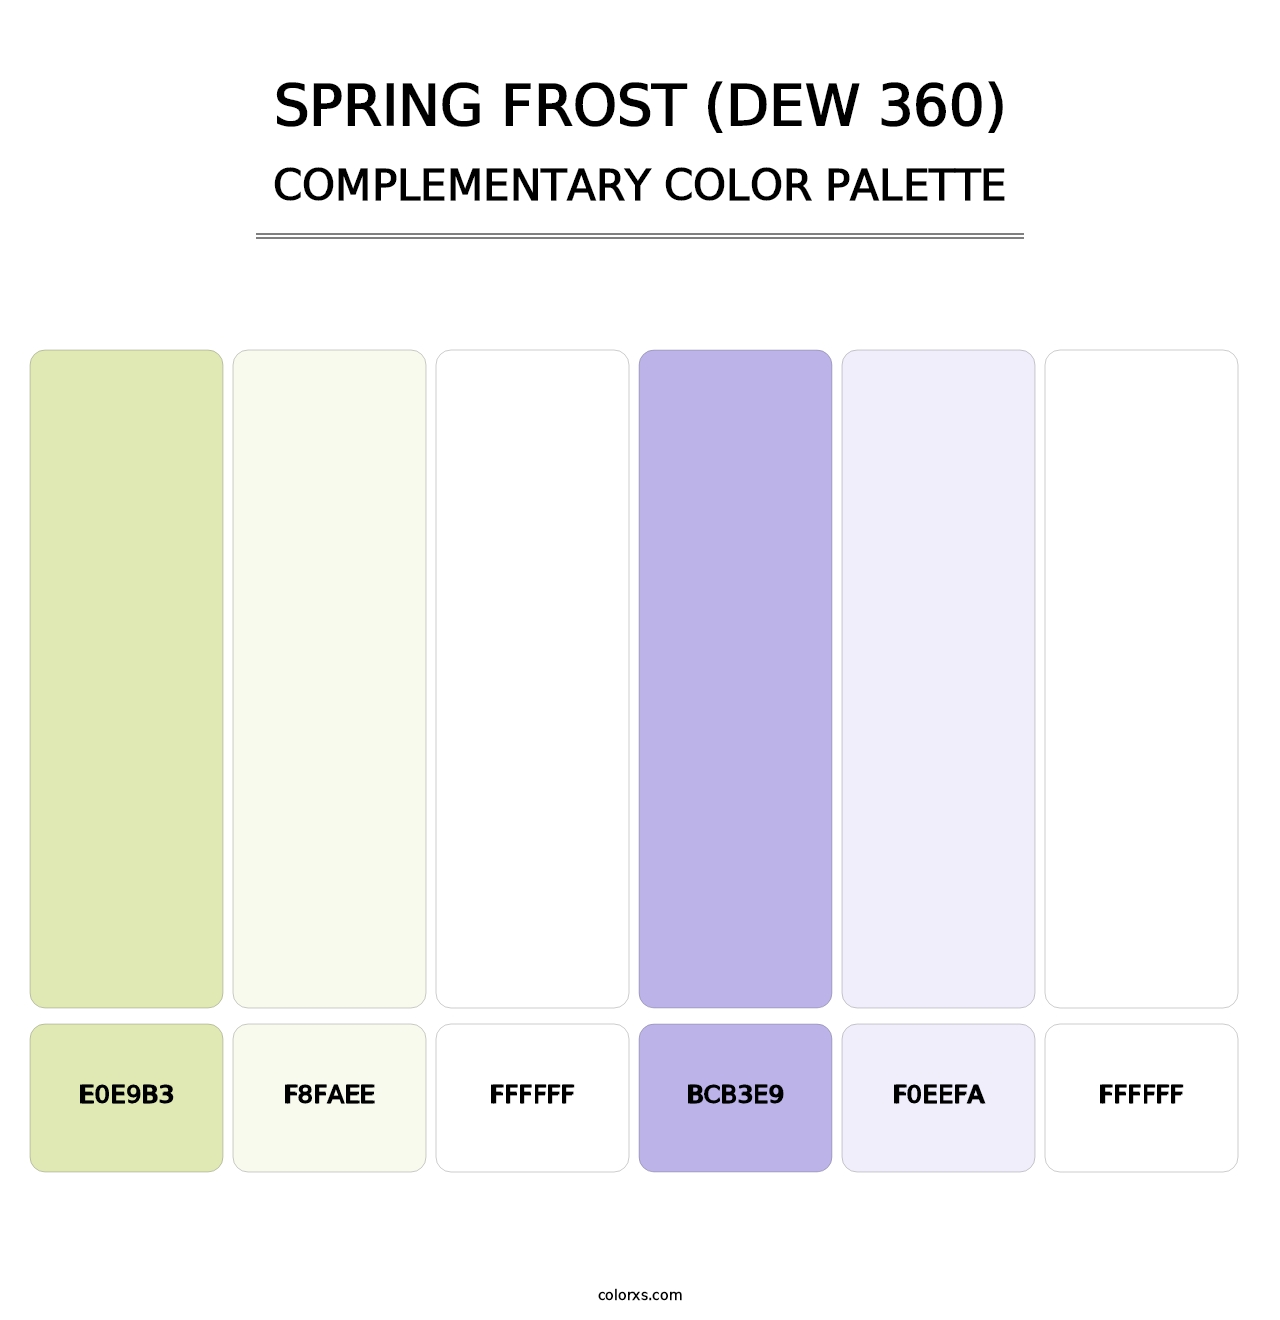 Spring Frost (DEW 360) - Complementary Color Palette